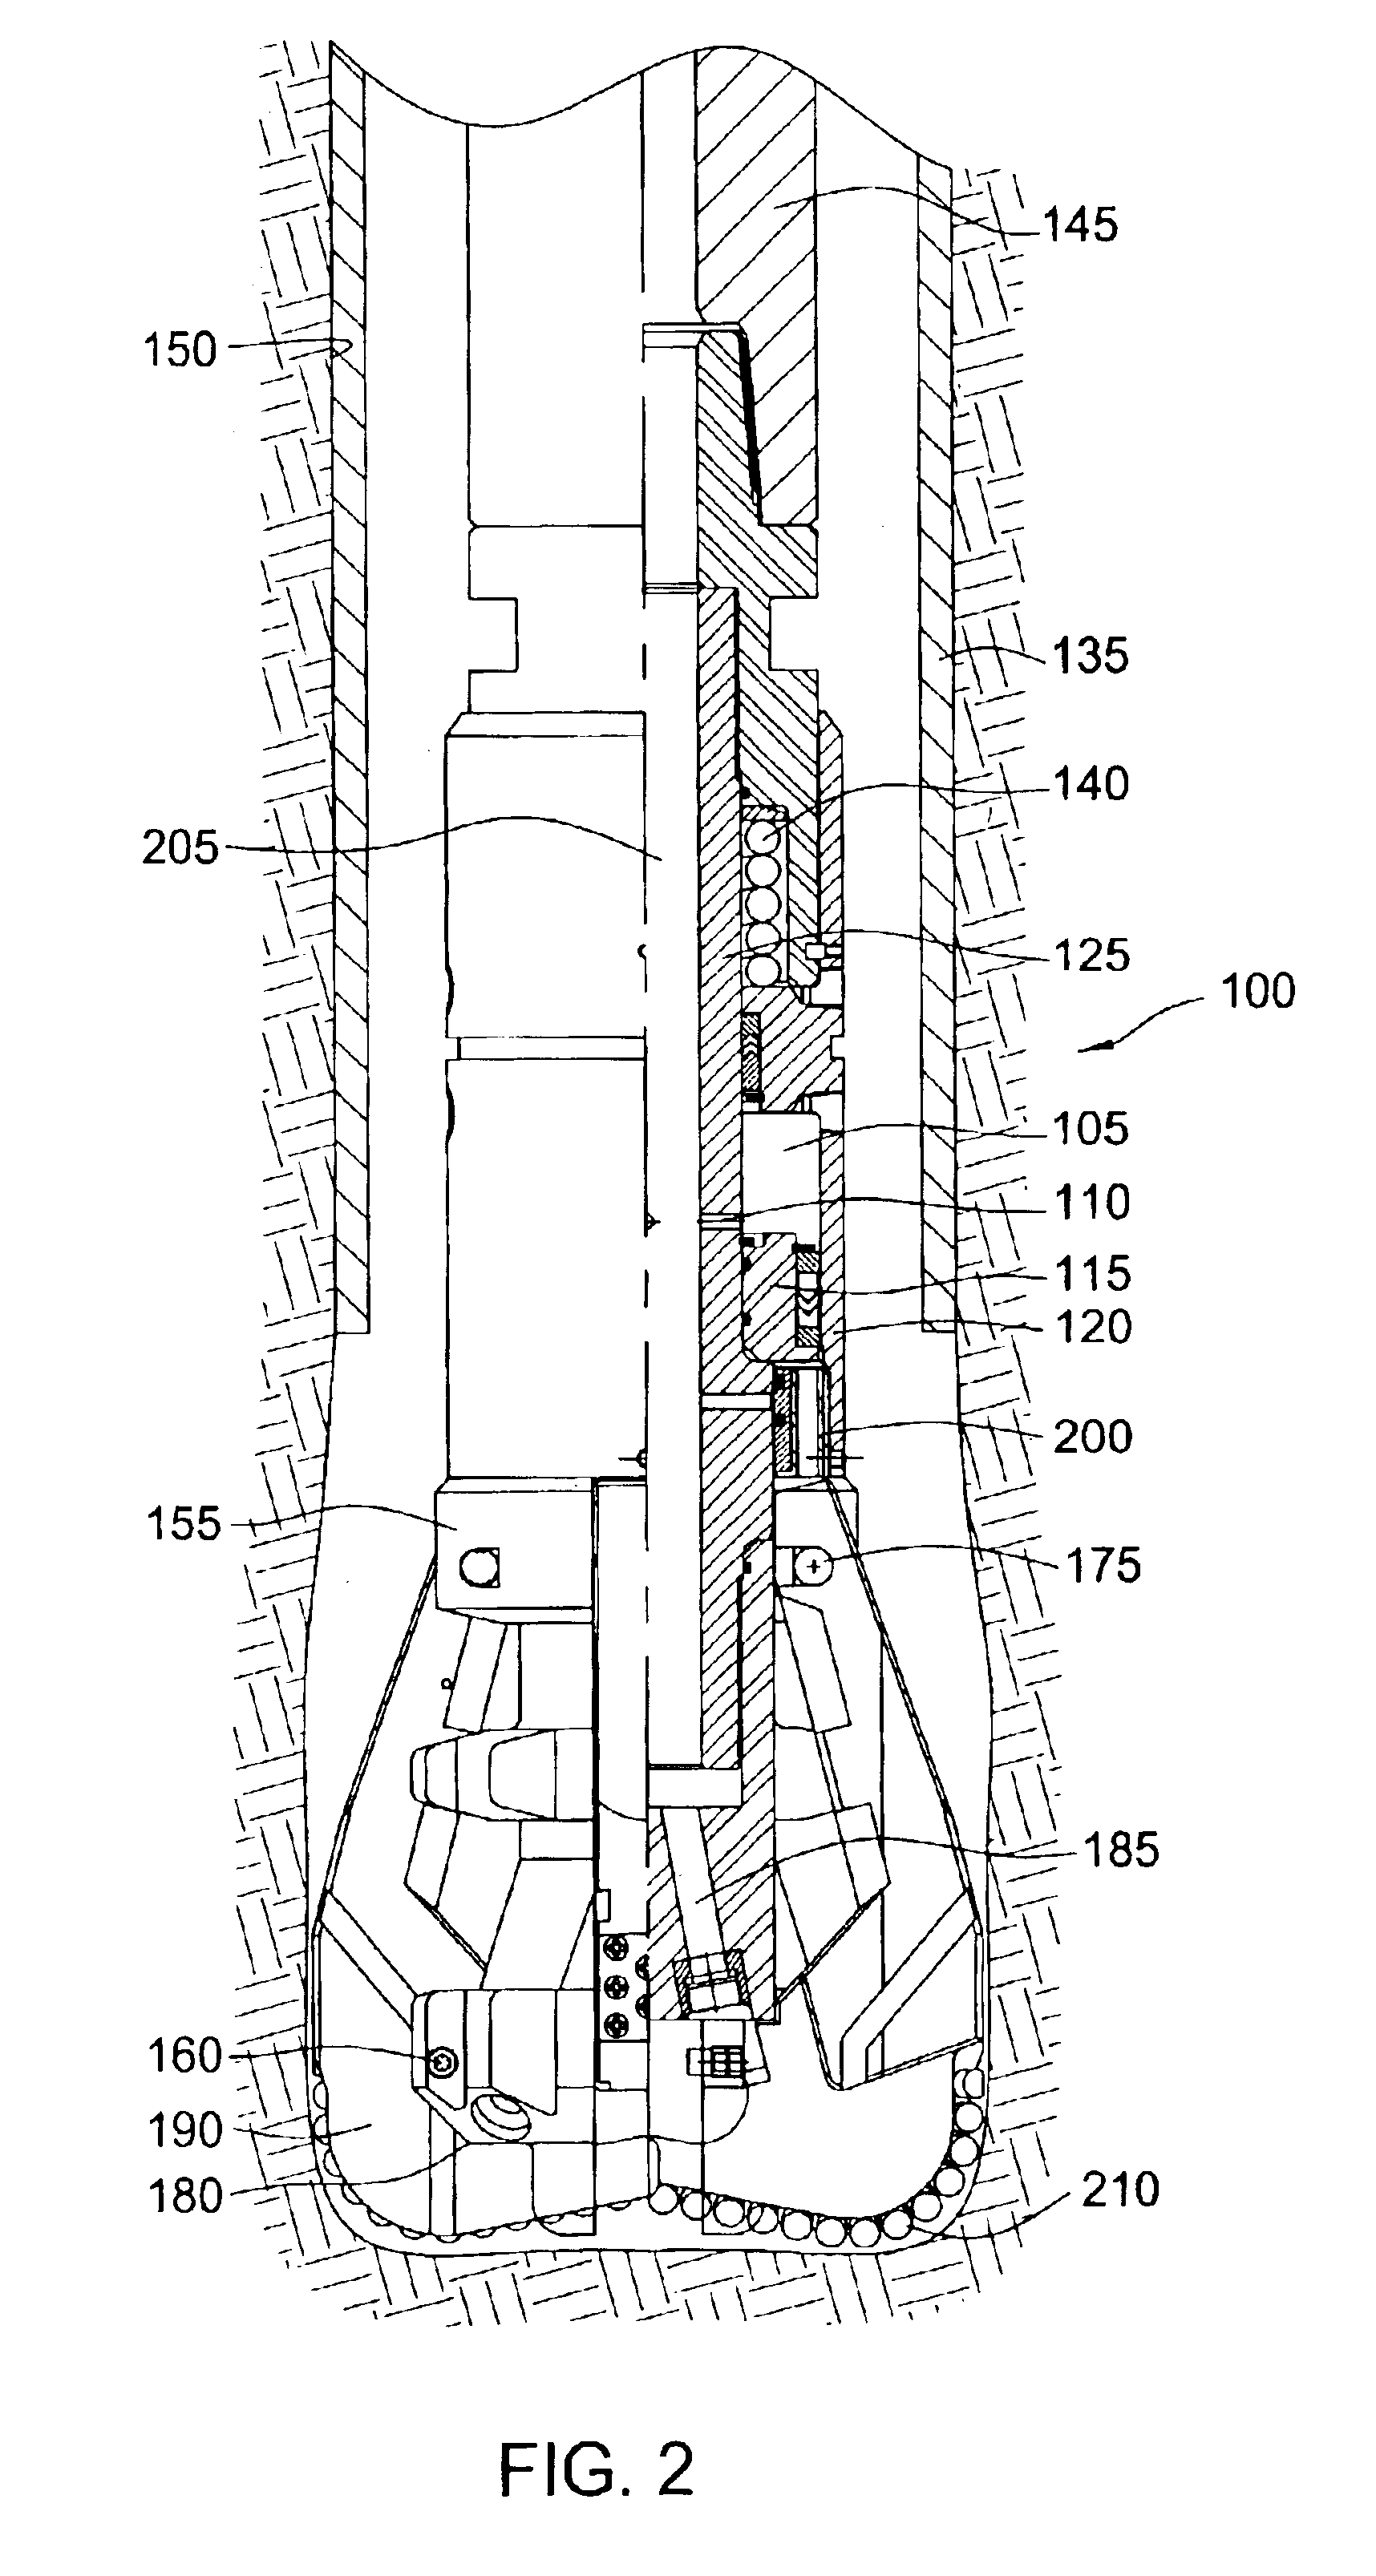 Expandable bit with secondary release device